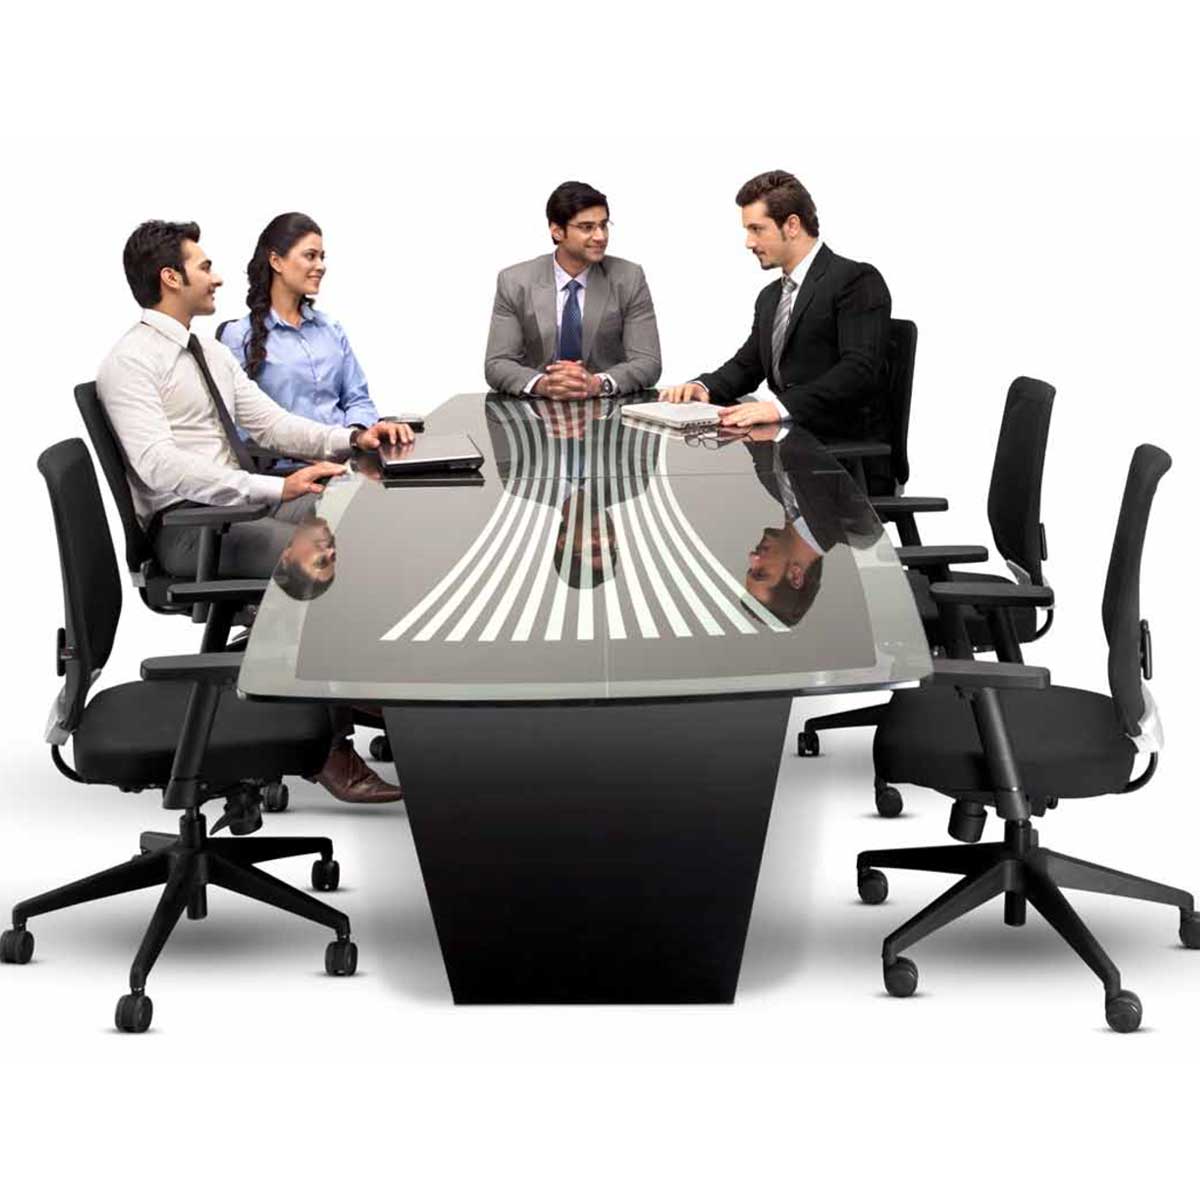 Conference table Manufacturers, Suppliers in Kundli Industrial Area